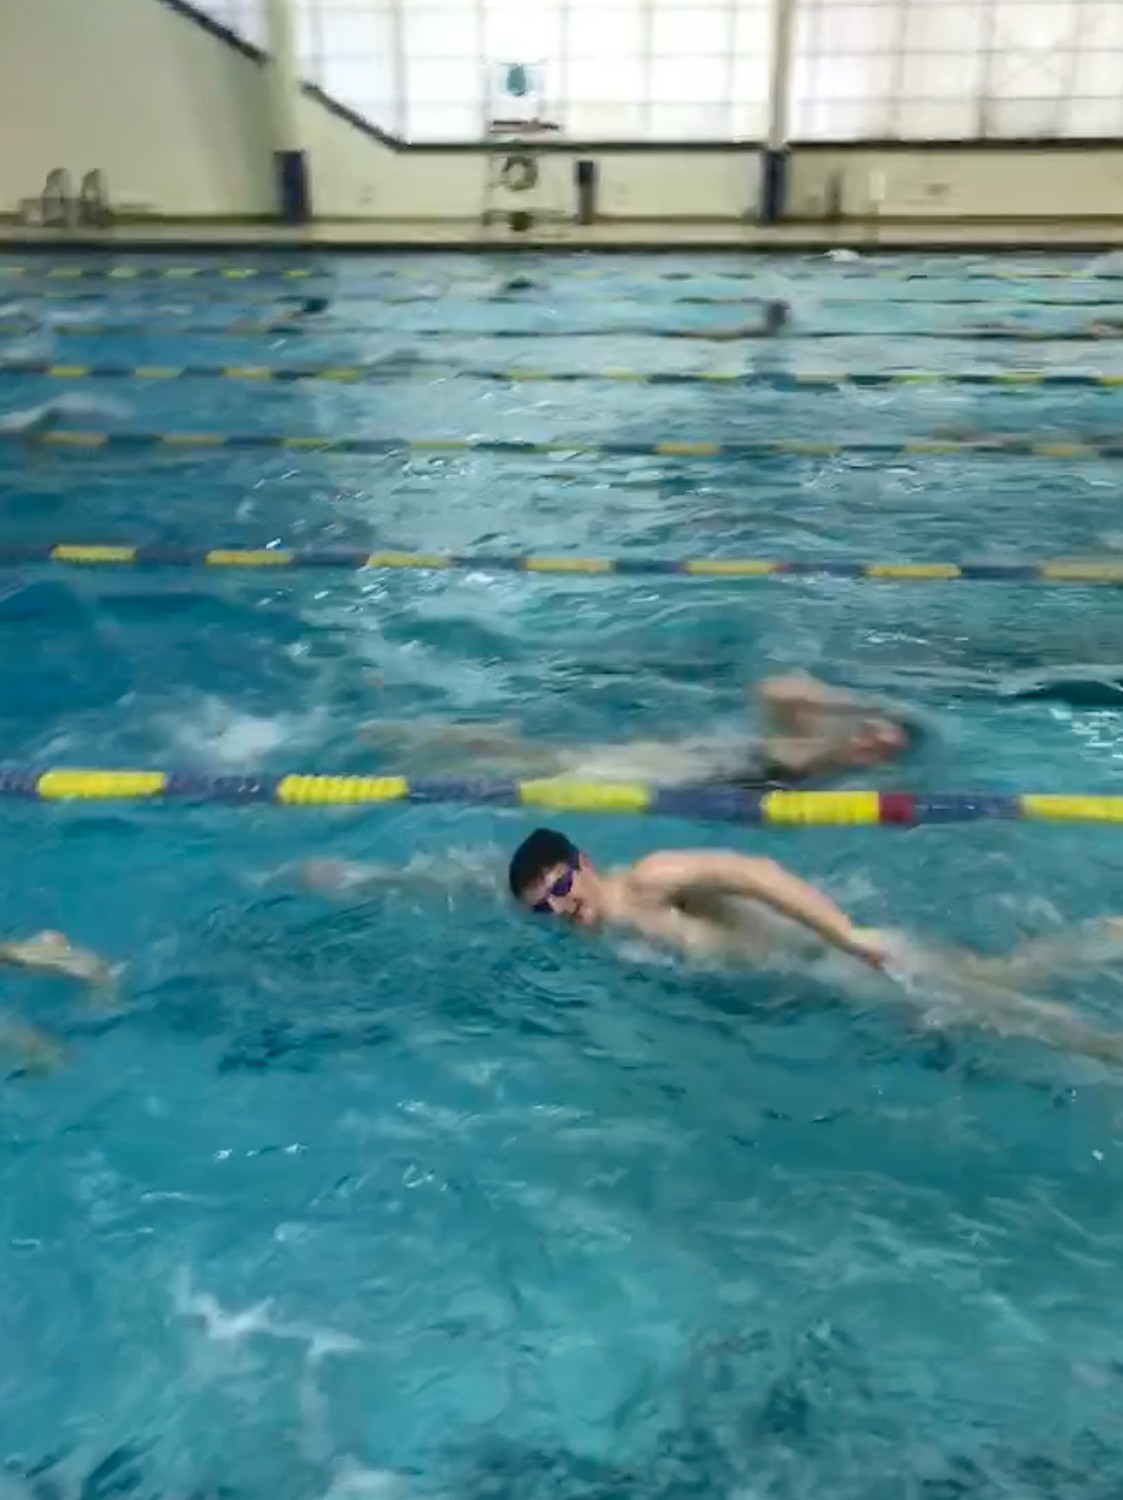 Kyle Bergin, a senior, has been swimming since he was 7, and was instrumental in urging the Lynbrook Board of Education to create a swim team three years ago.